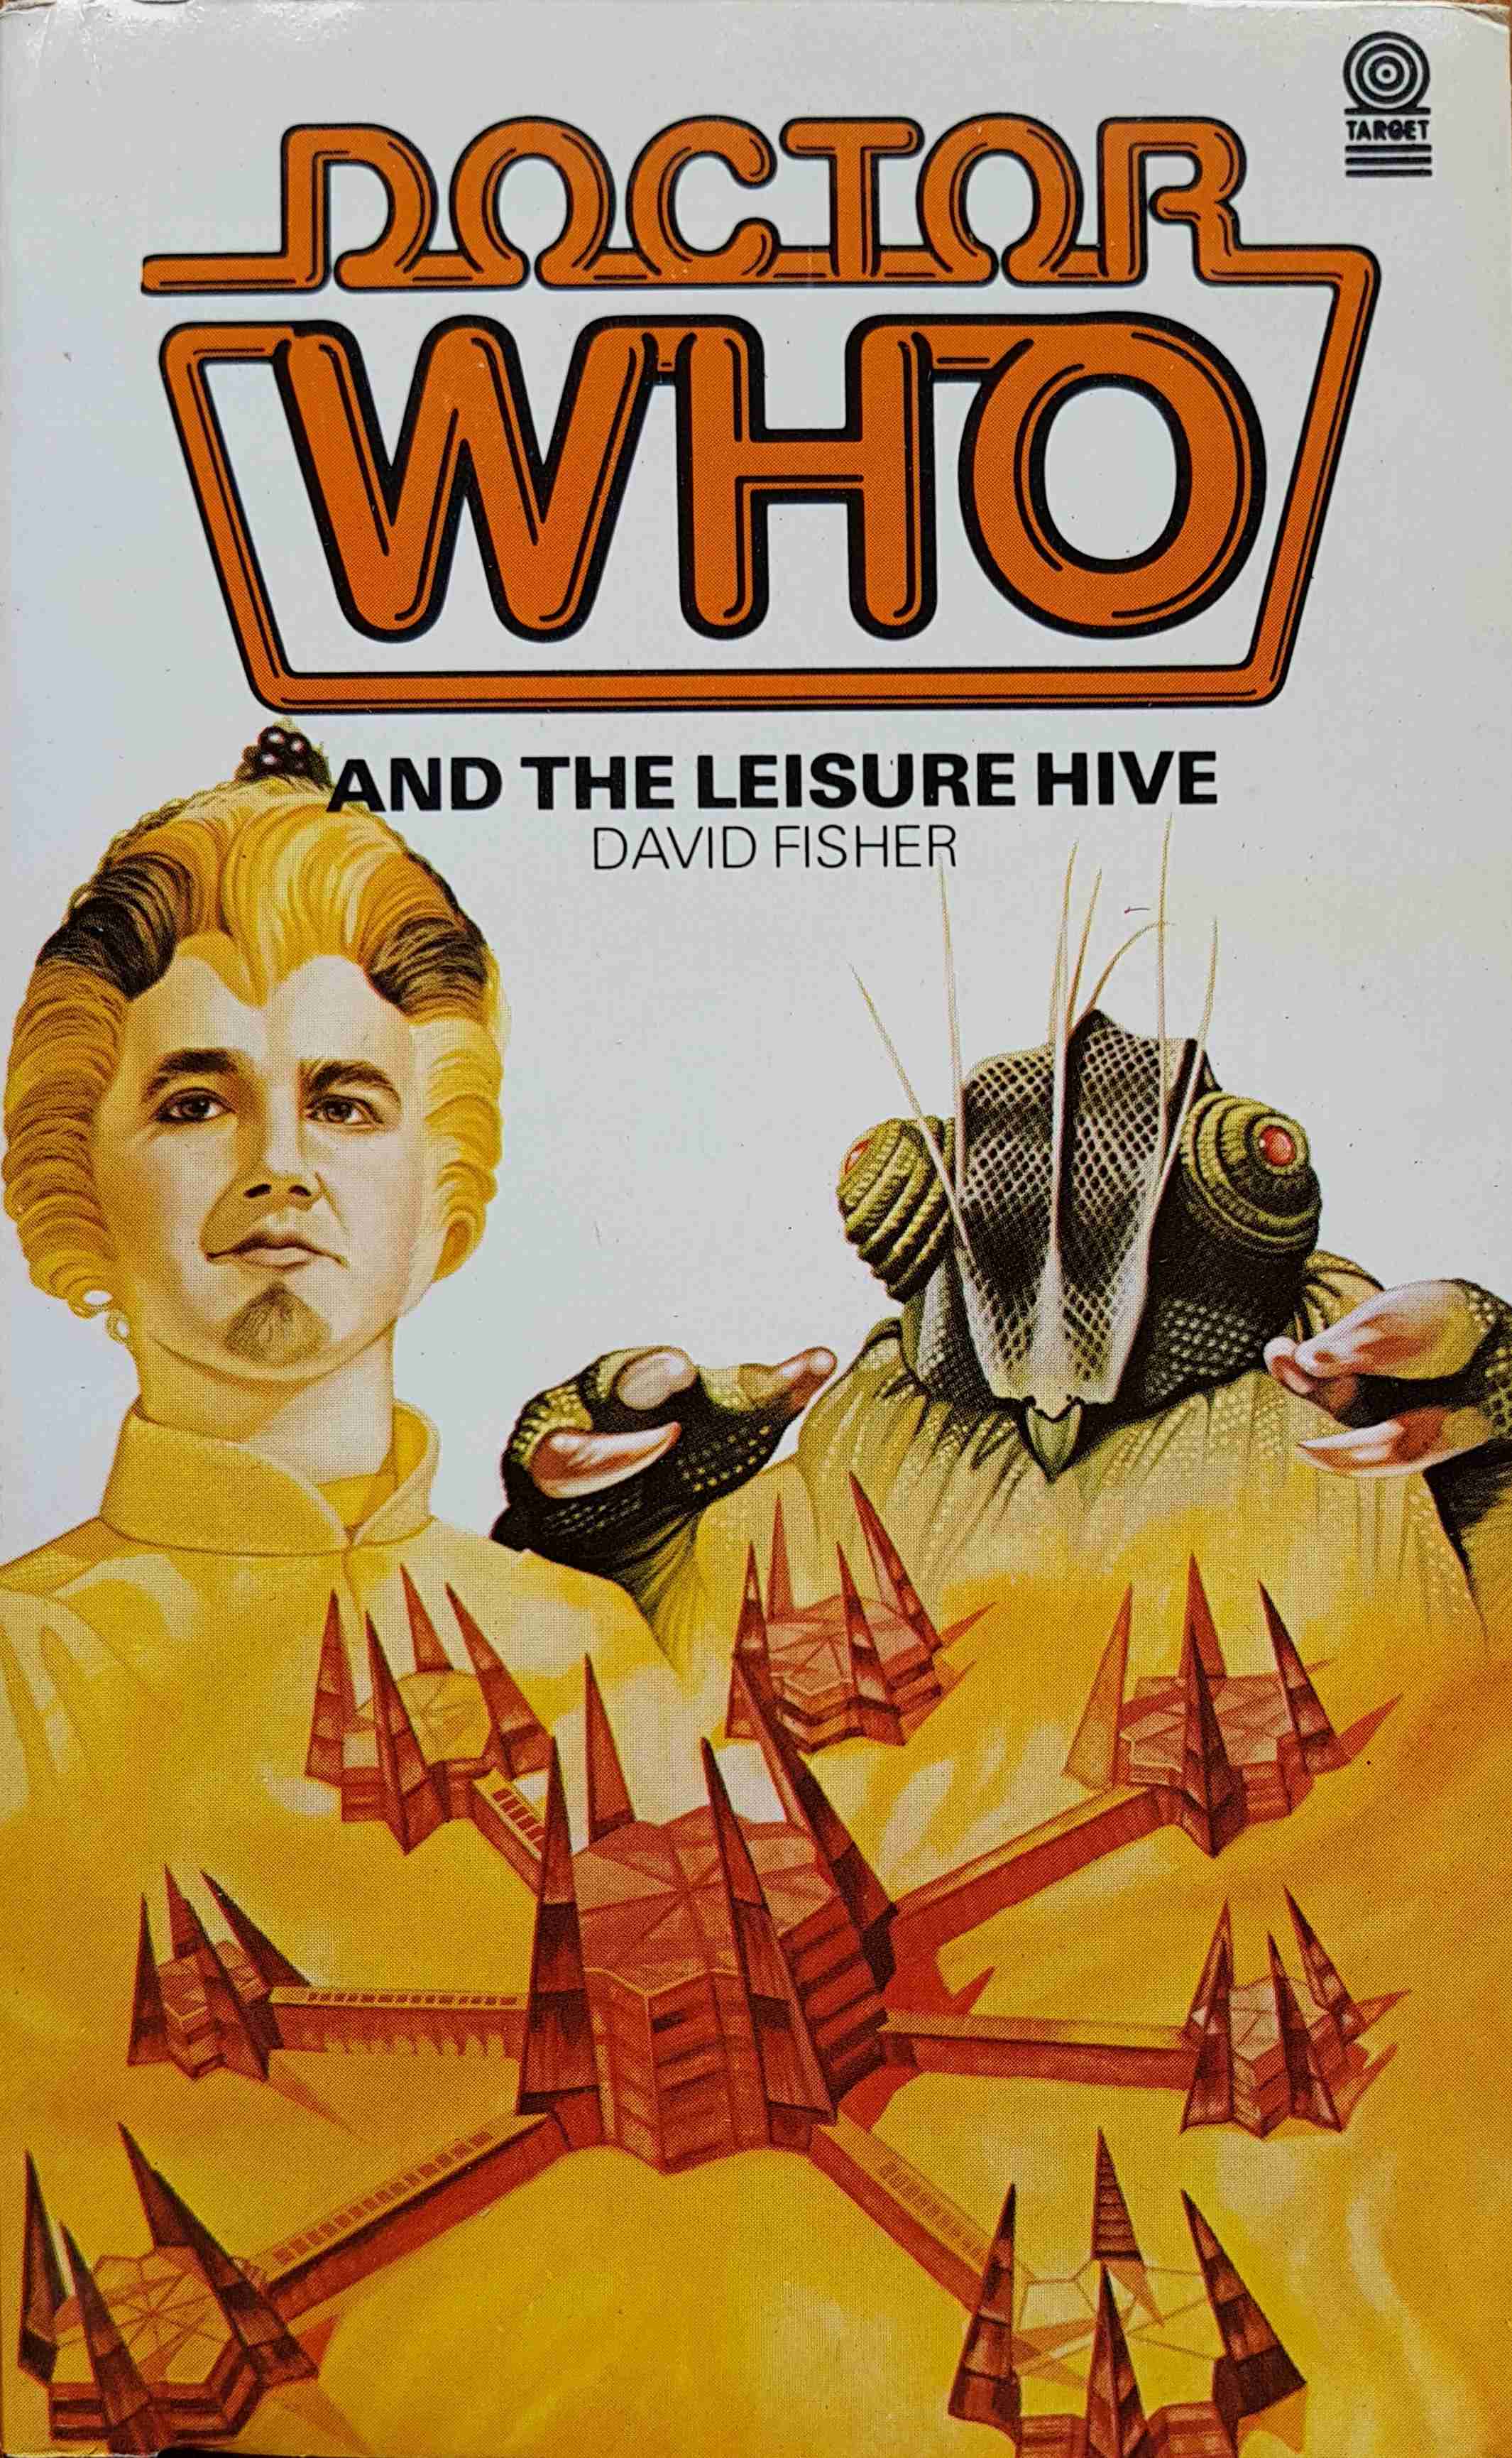 Picture of 0-426-20147-7 Doctor Who - The leisure hive by artist David Fisher from the BBC records and Tapes library